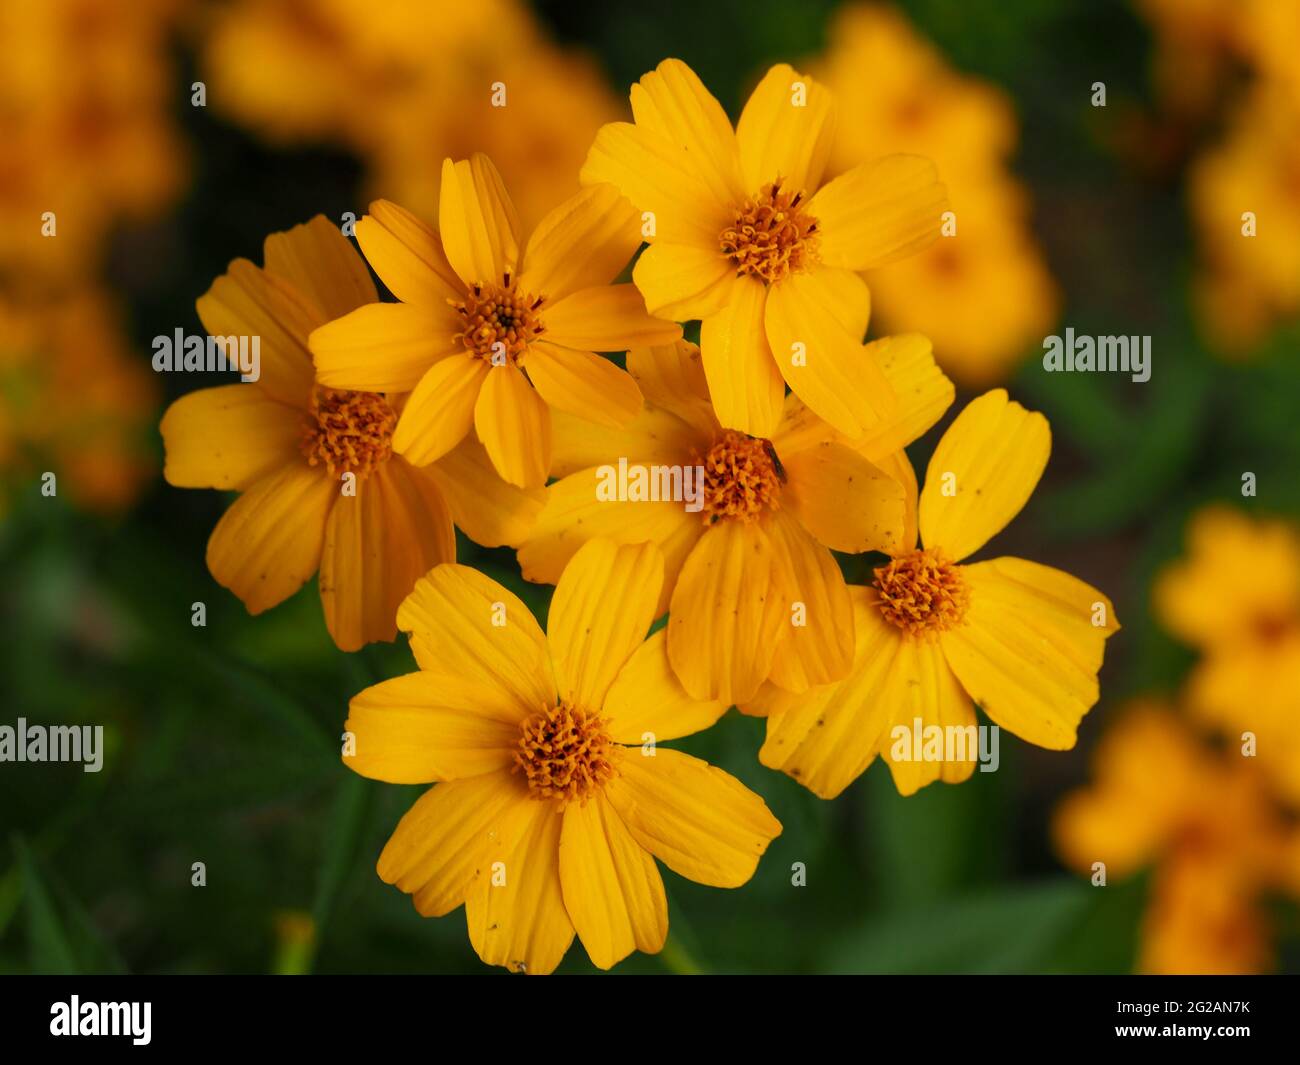 Flowers, Pretty burst of colour. Bright yellow daisy-like Tree Marigold blooms growing in Australian garden, petal details, brilliant blooms, Winter Stock Photo